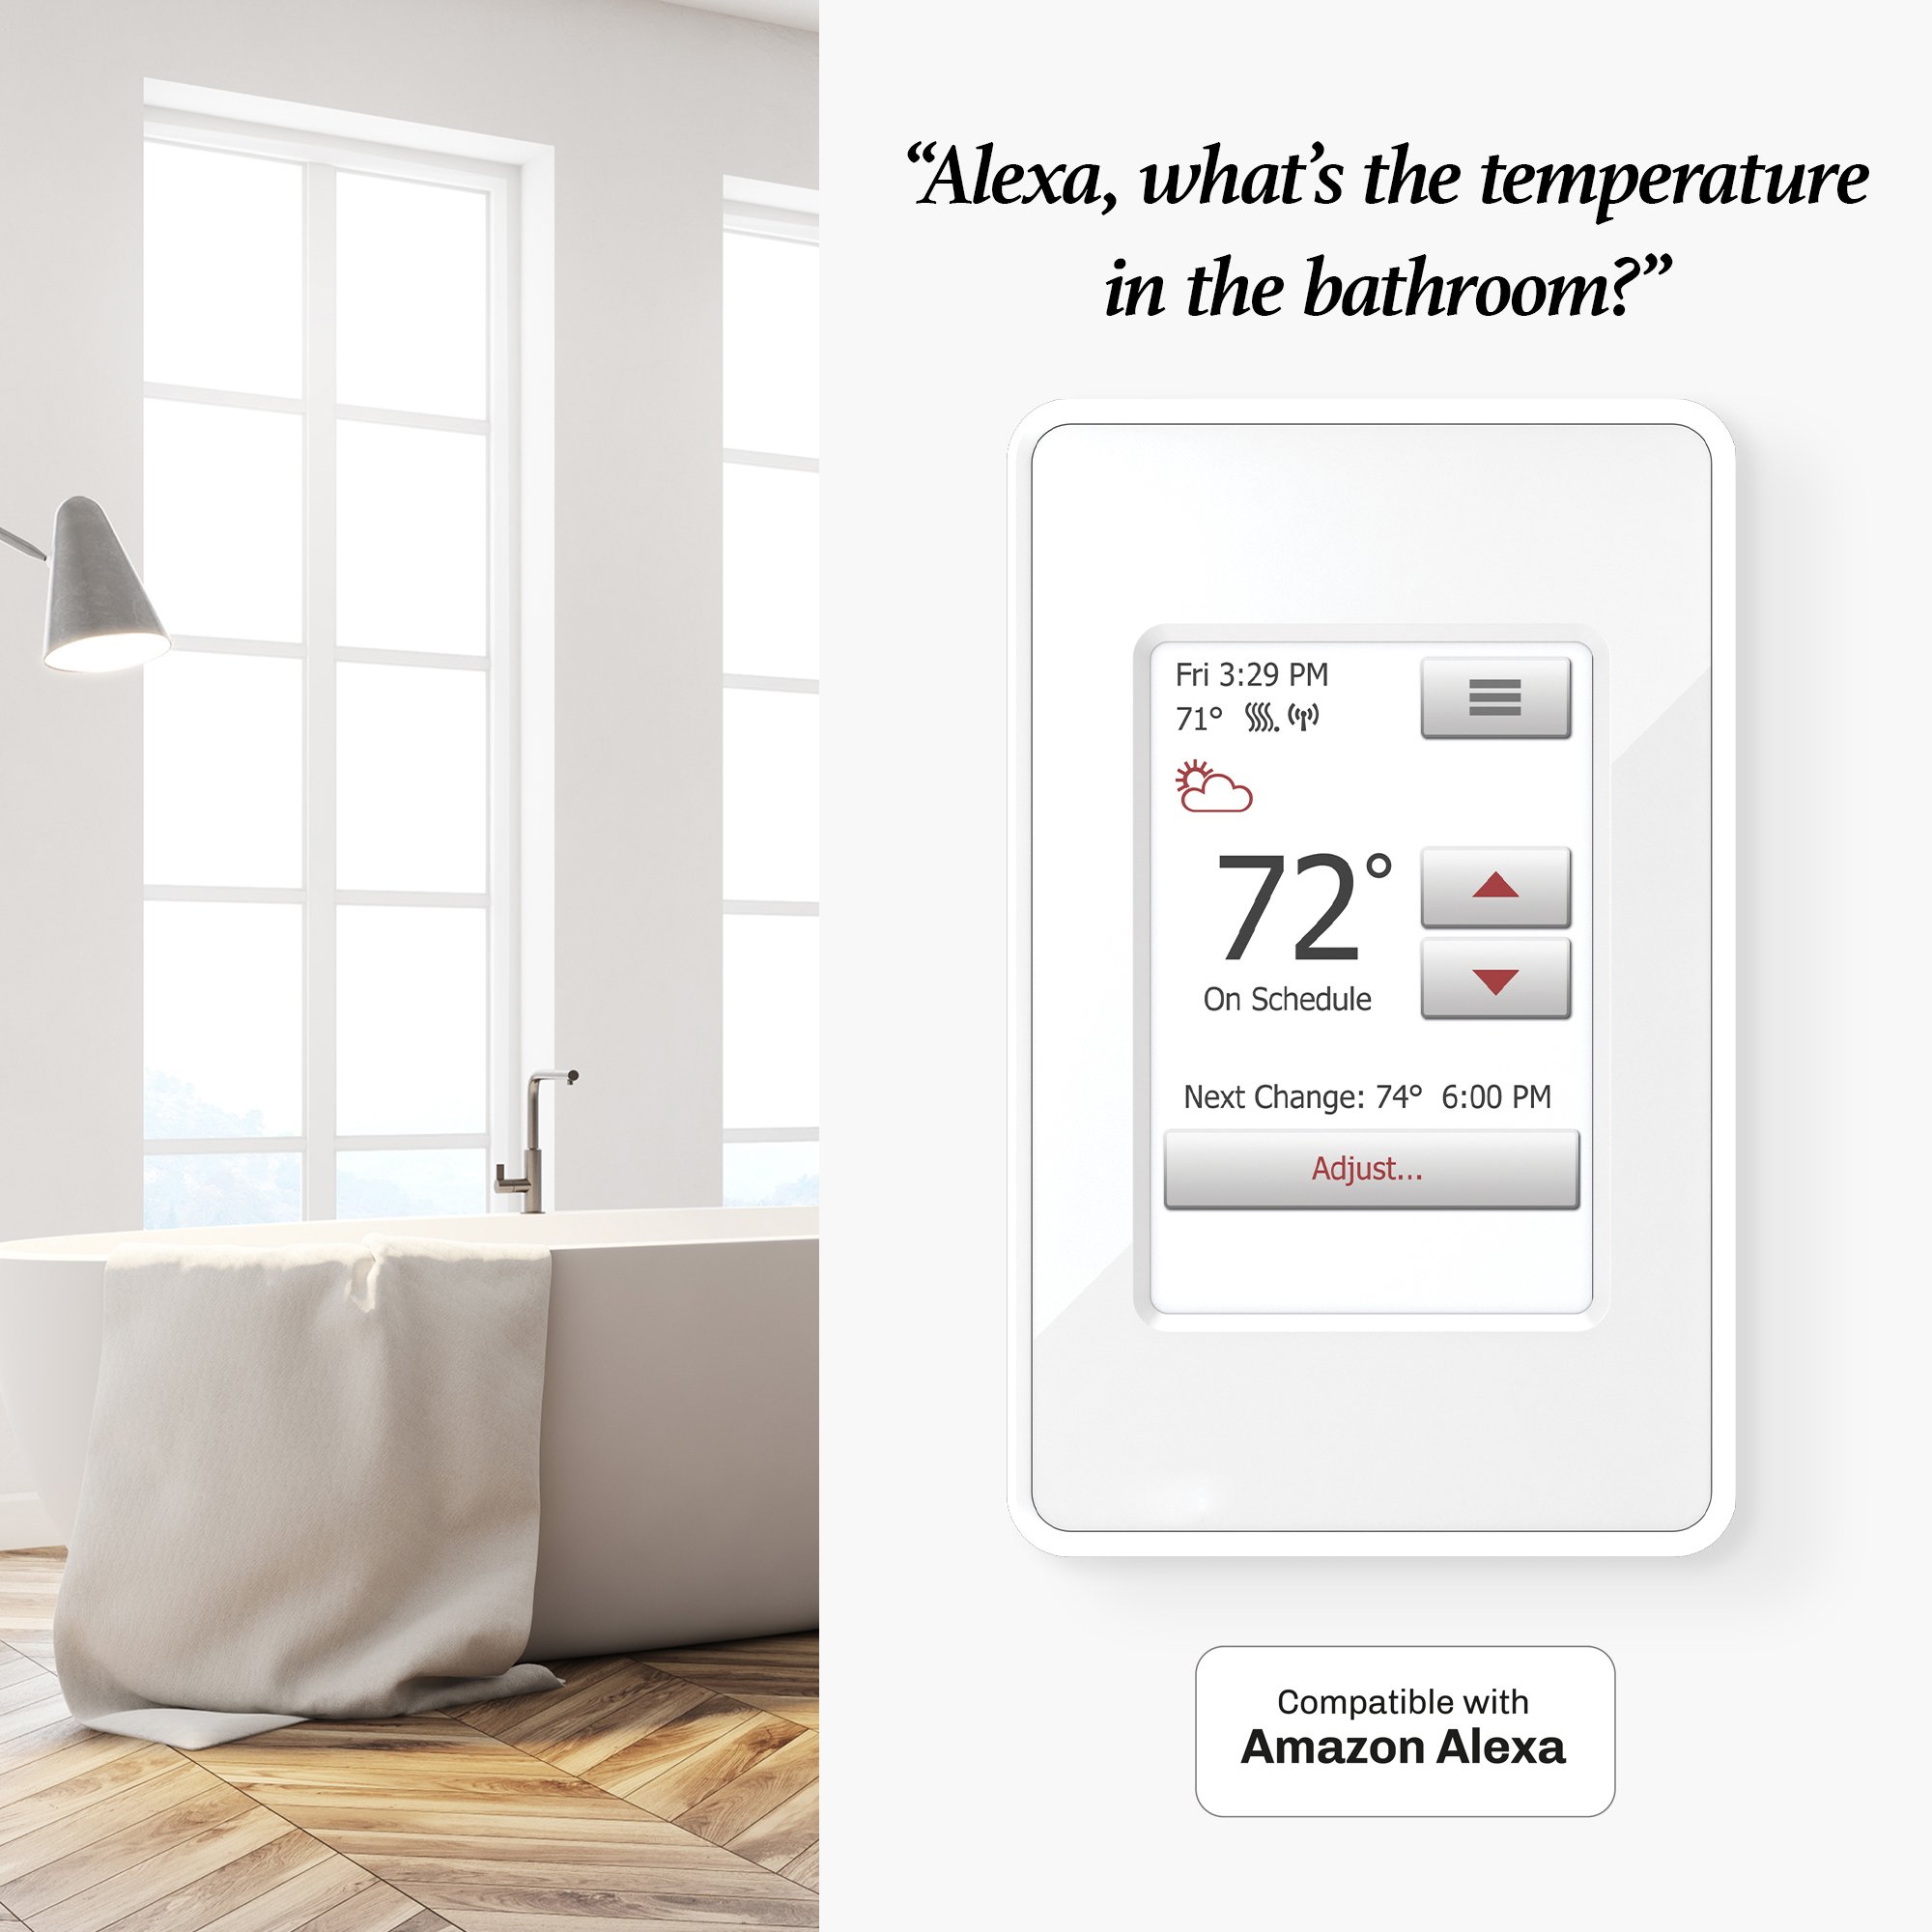 120-Volt/240-Volt Programmable WIFI Enabled Smart Touch Thermostat with  Floor Sensor